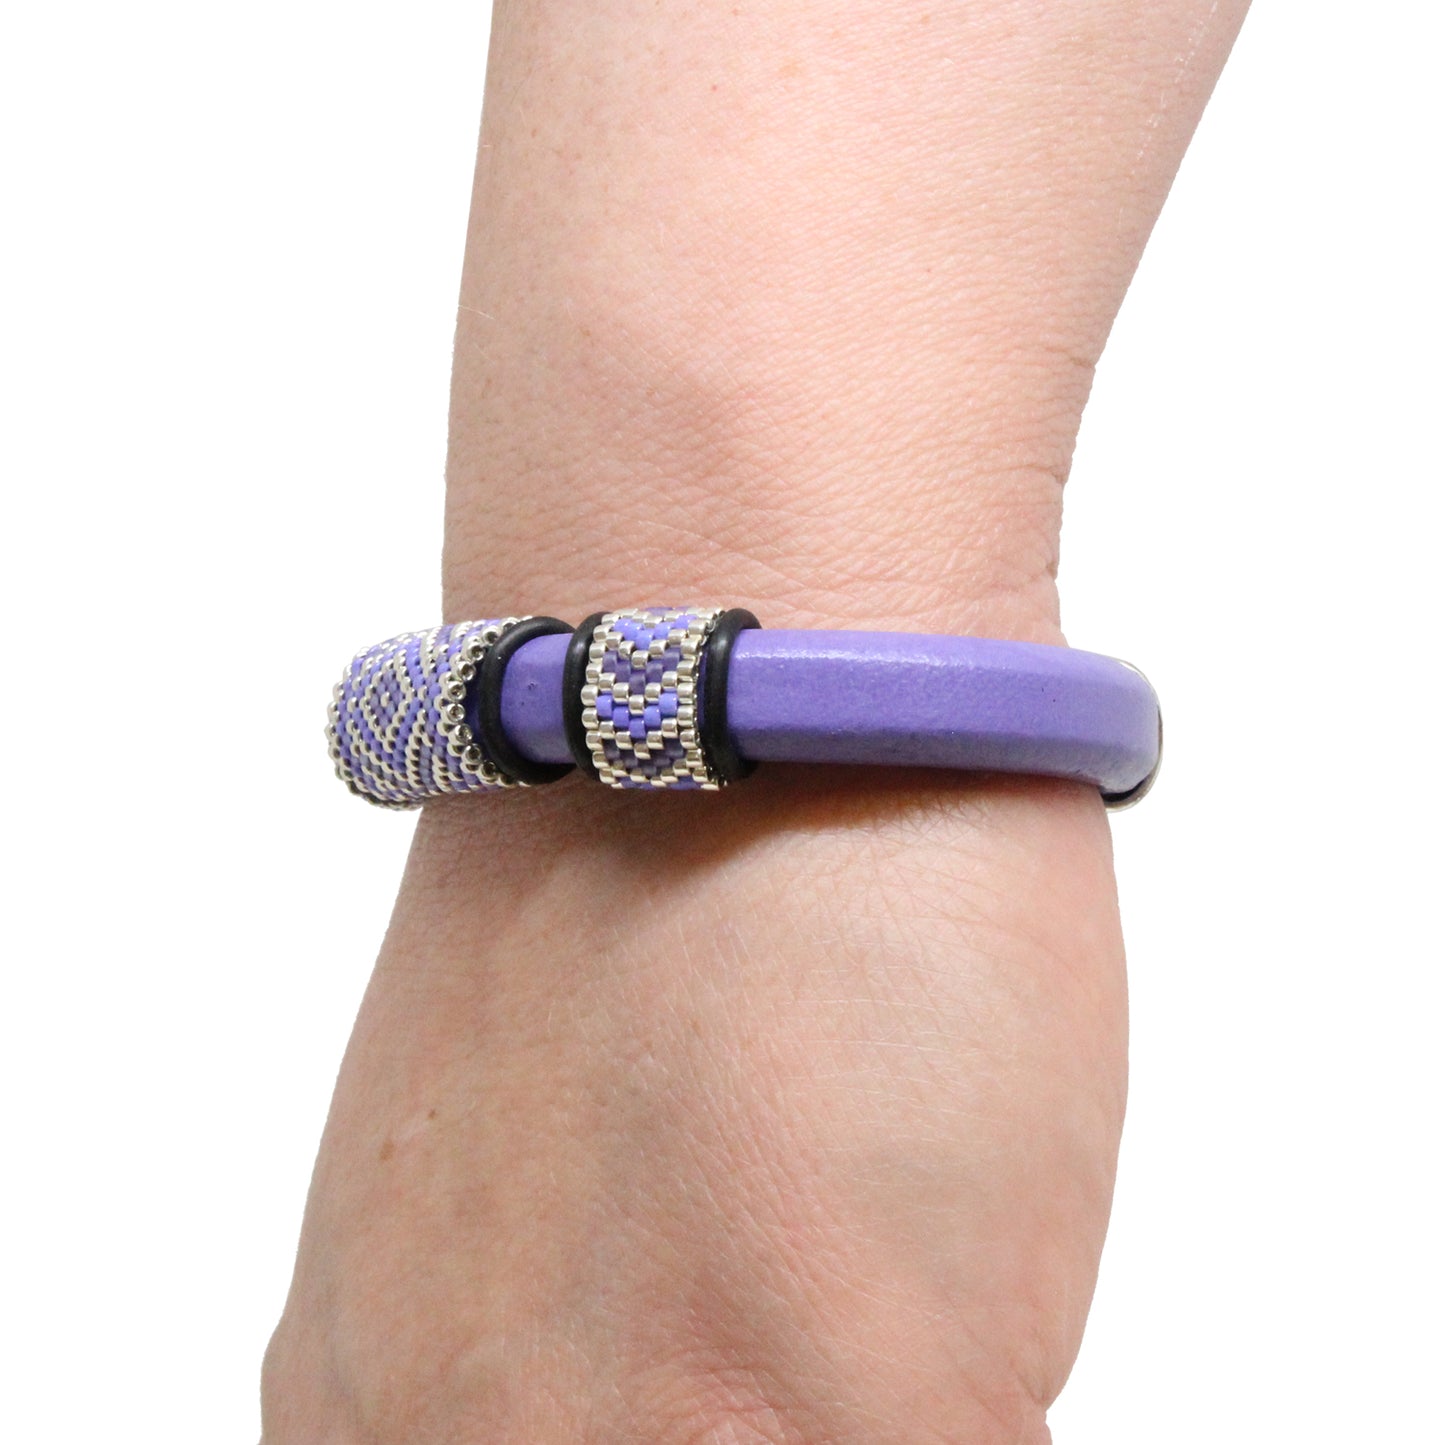 LILAC PURPLE Geometric Bracelet / fits 6.5 to 7 Inch wrist size / leather with magnetic clasp